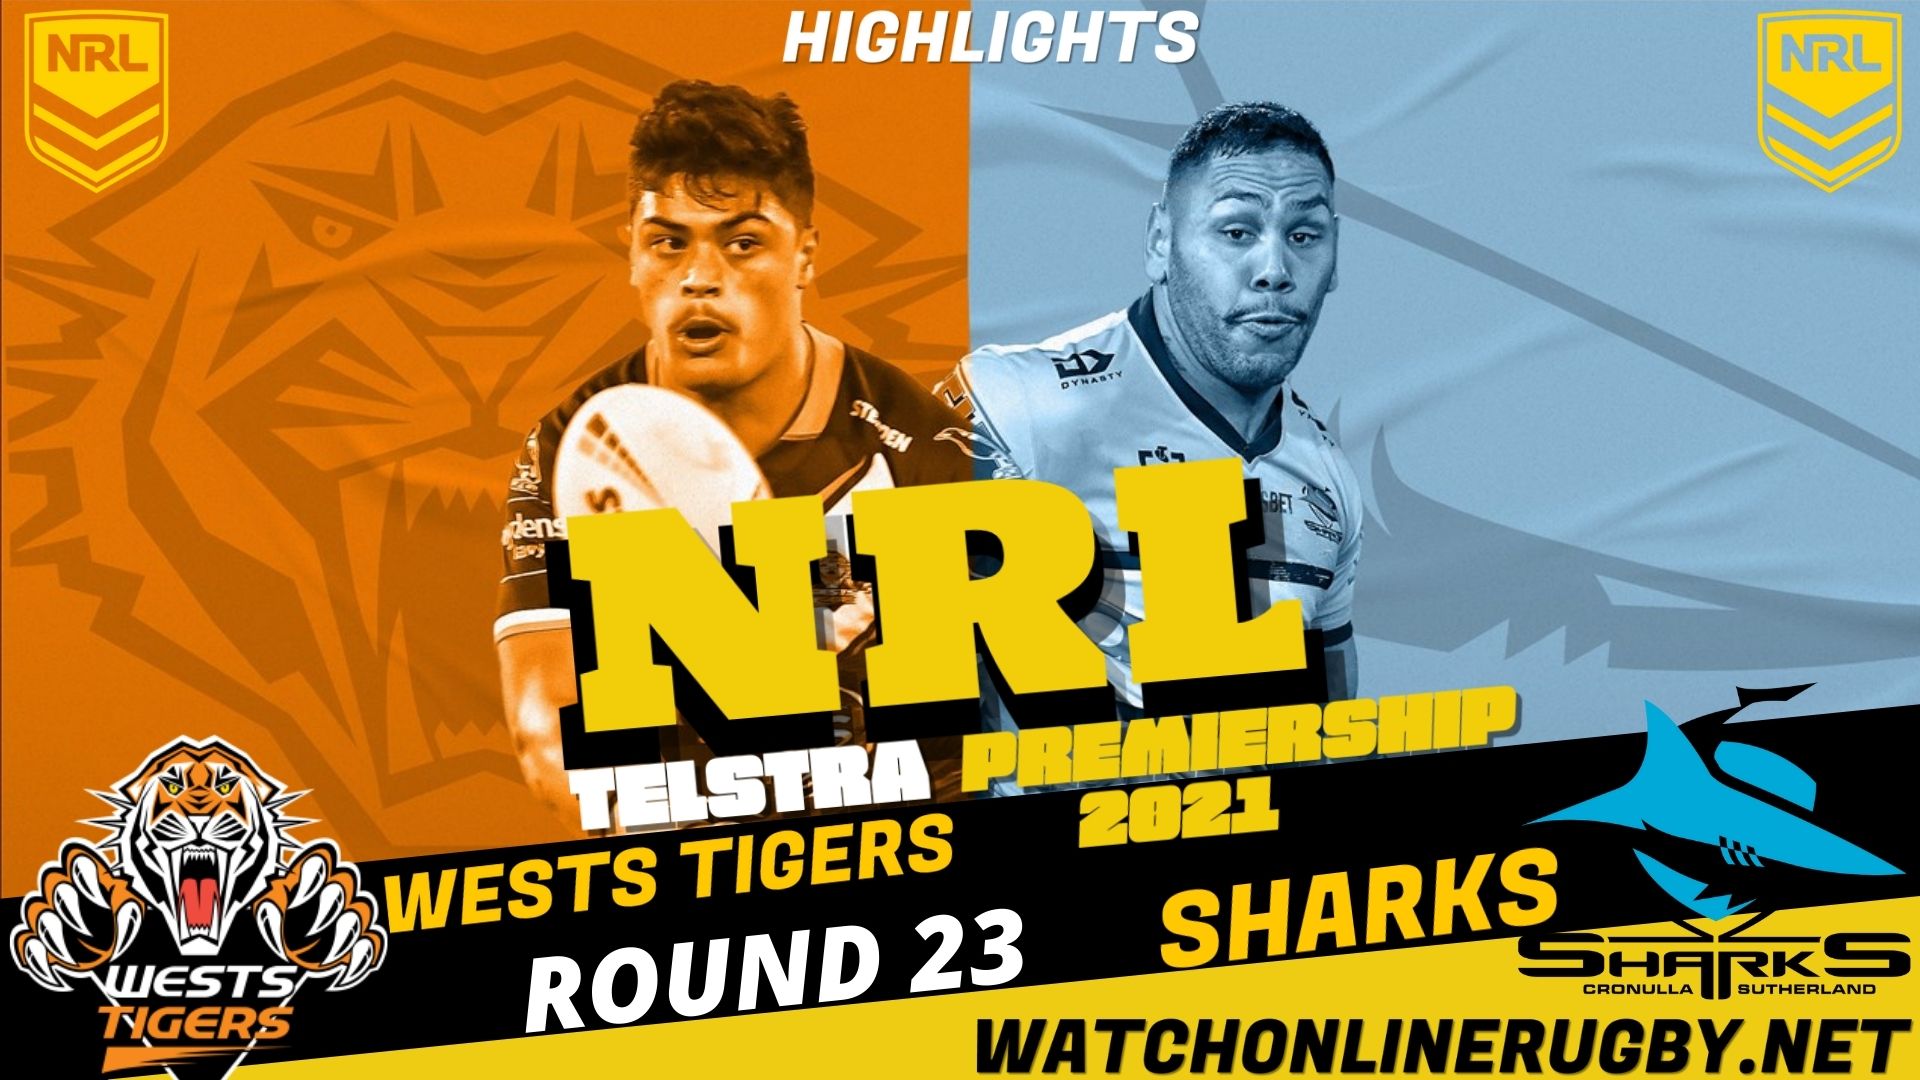 Wests Tigers Vs Sharks Highlights 2021 RD 23 NRL Rugby